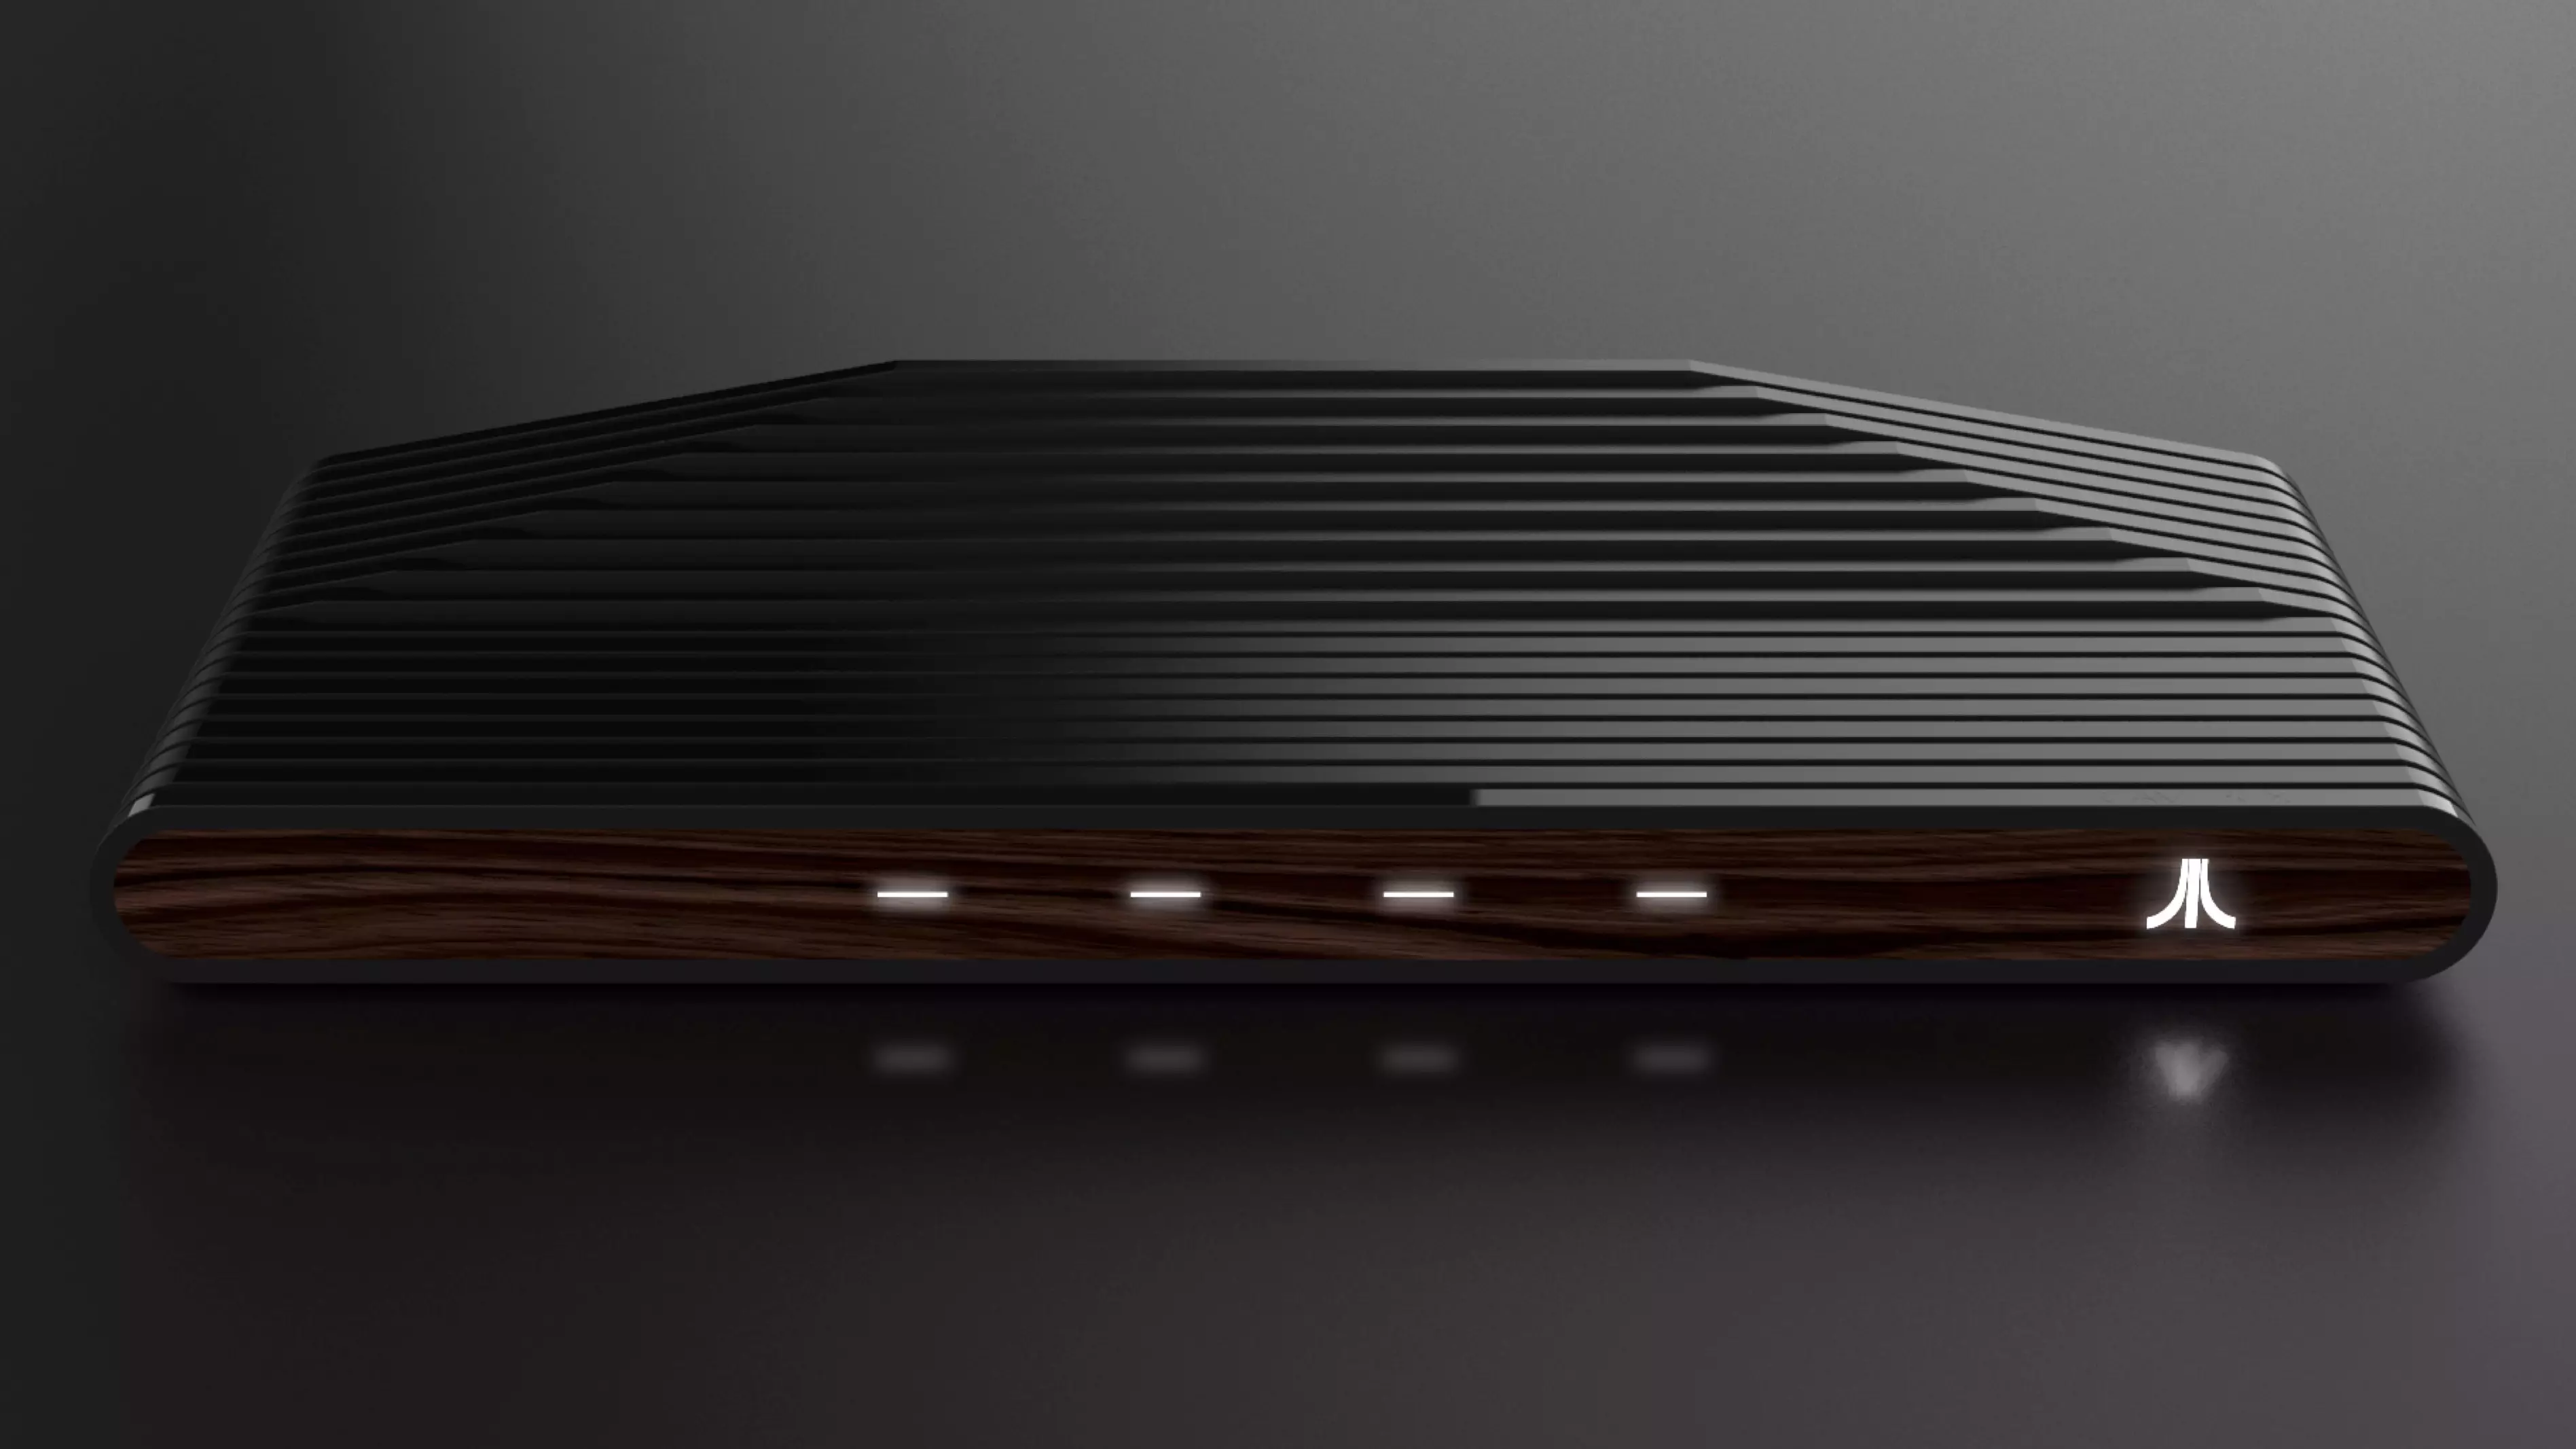 Atari Has Revealed Details And Images Of Its First Console In 20 Years